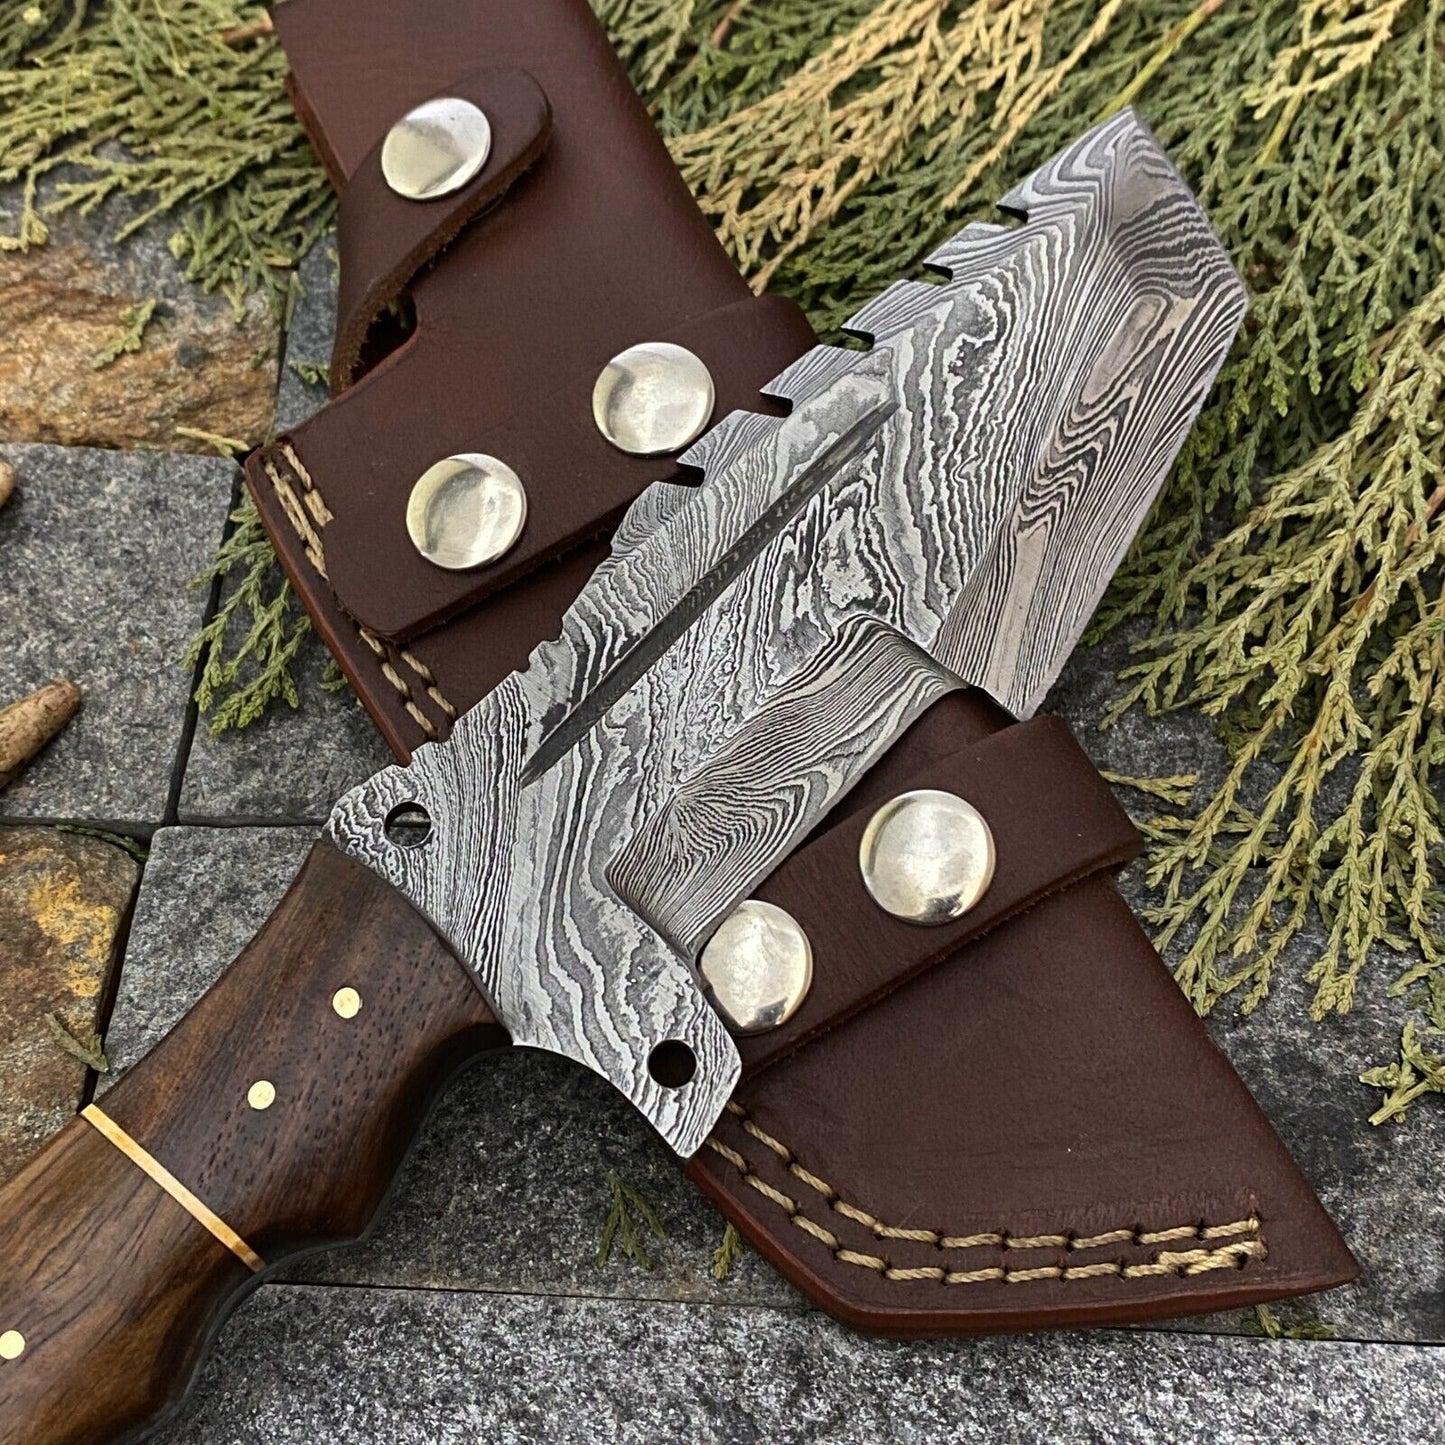 SHARDBLADE HAND FORGED DAMASCUS STEEL CAMPING TRACKER HUNTING KNIFE WITH SHEATH